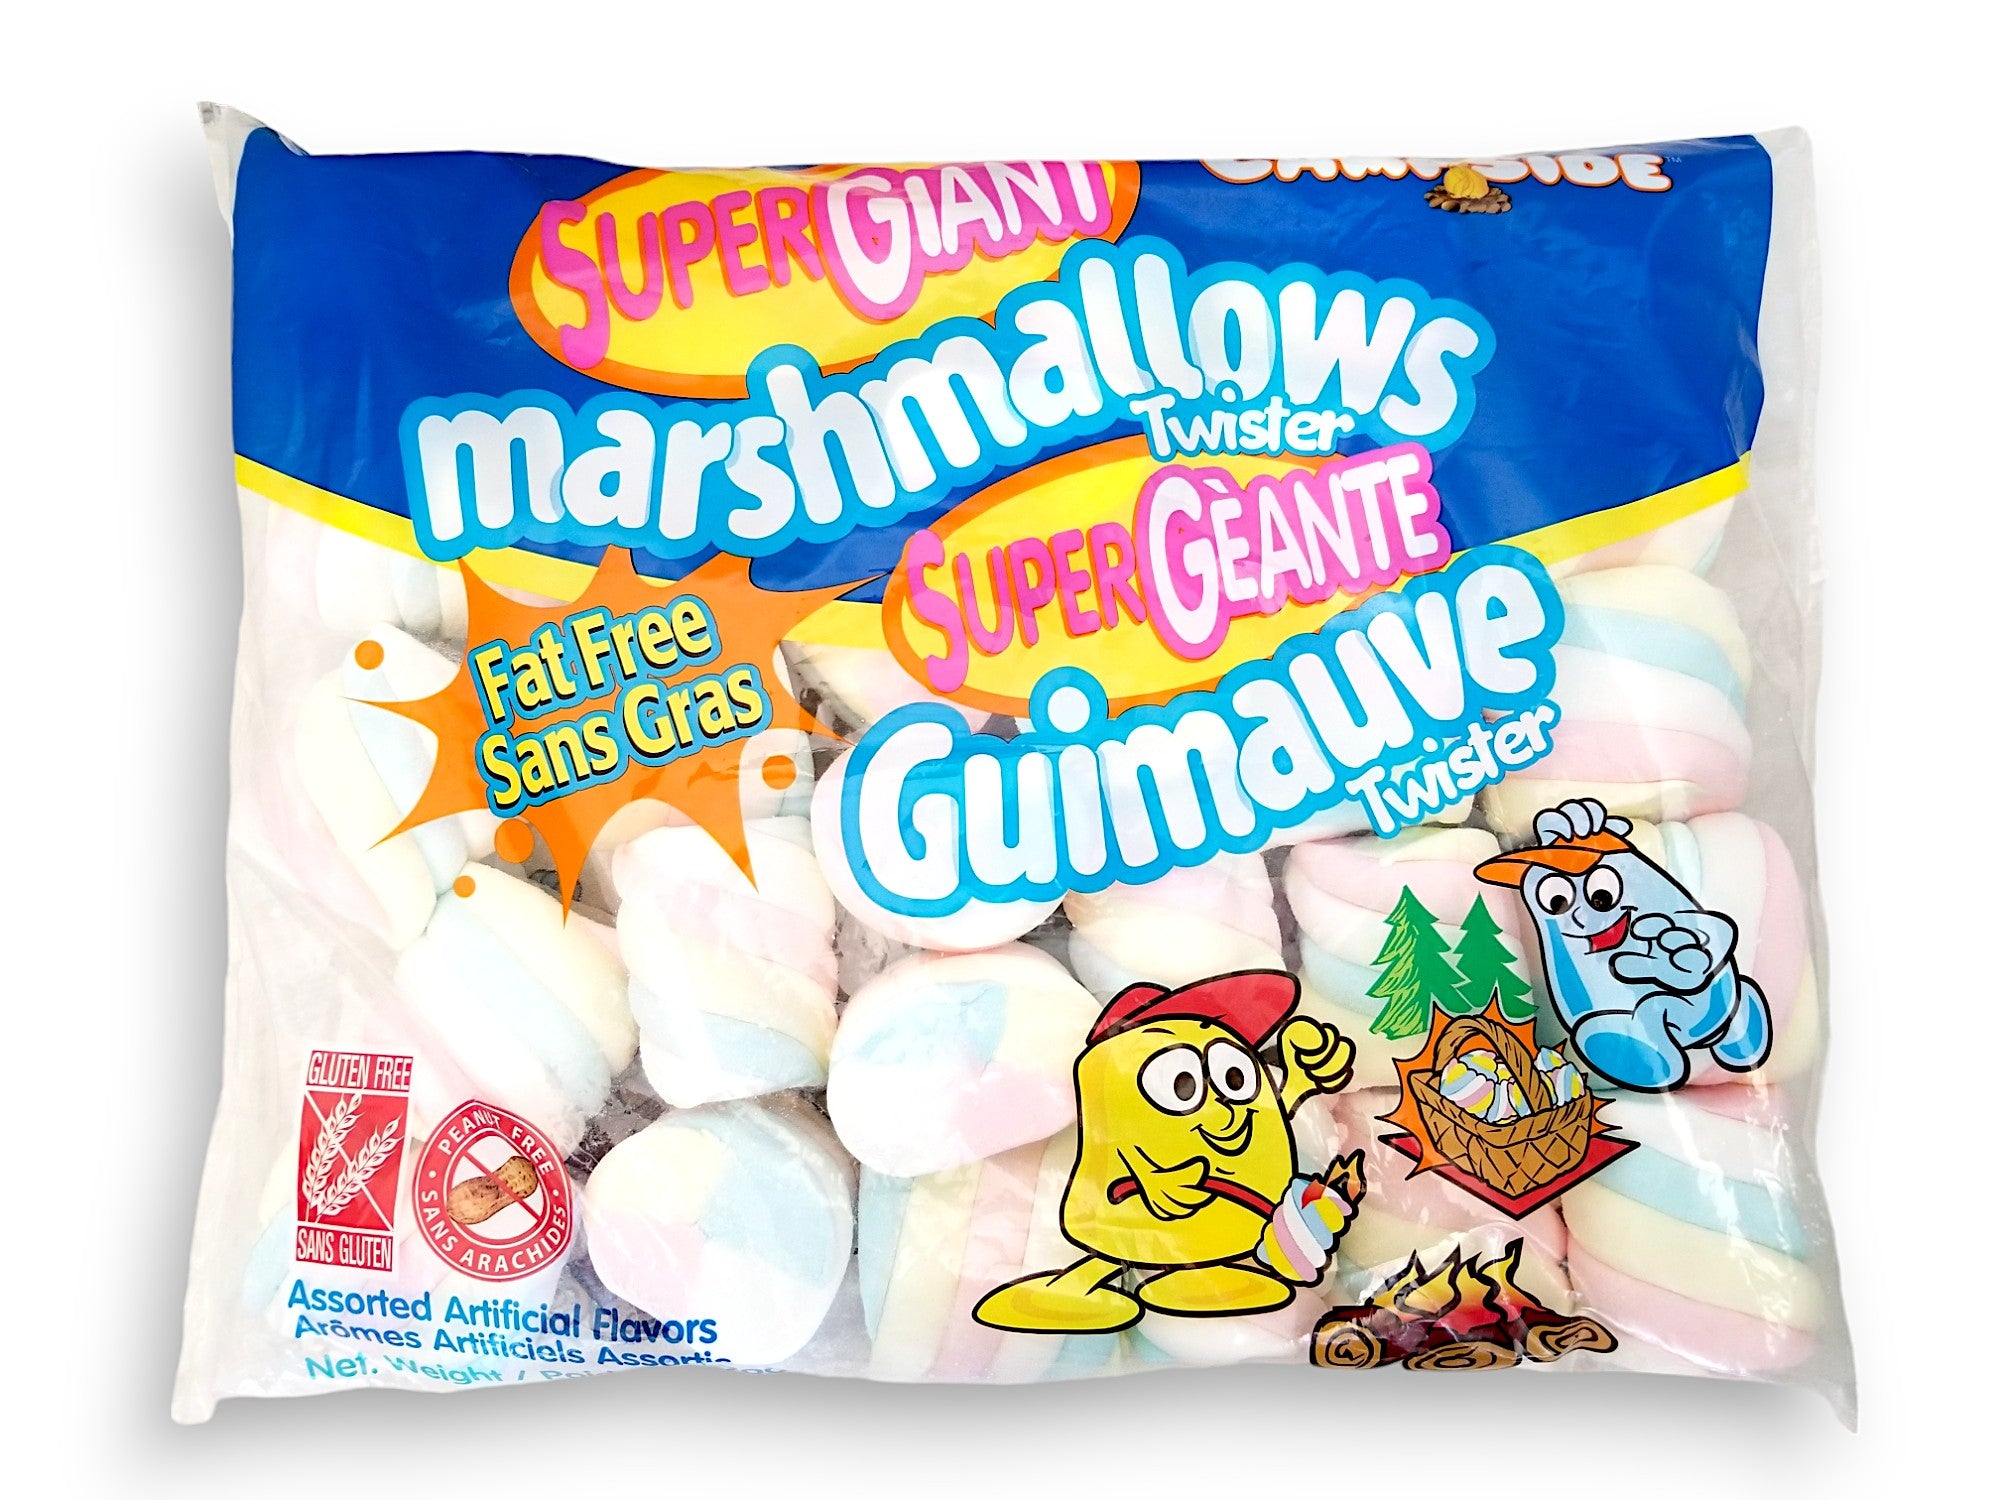 Campside Super Giant Twister Marshmallows, 700g, front of bag.